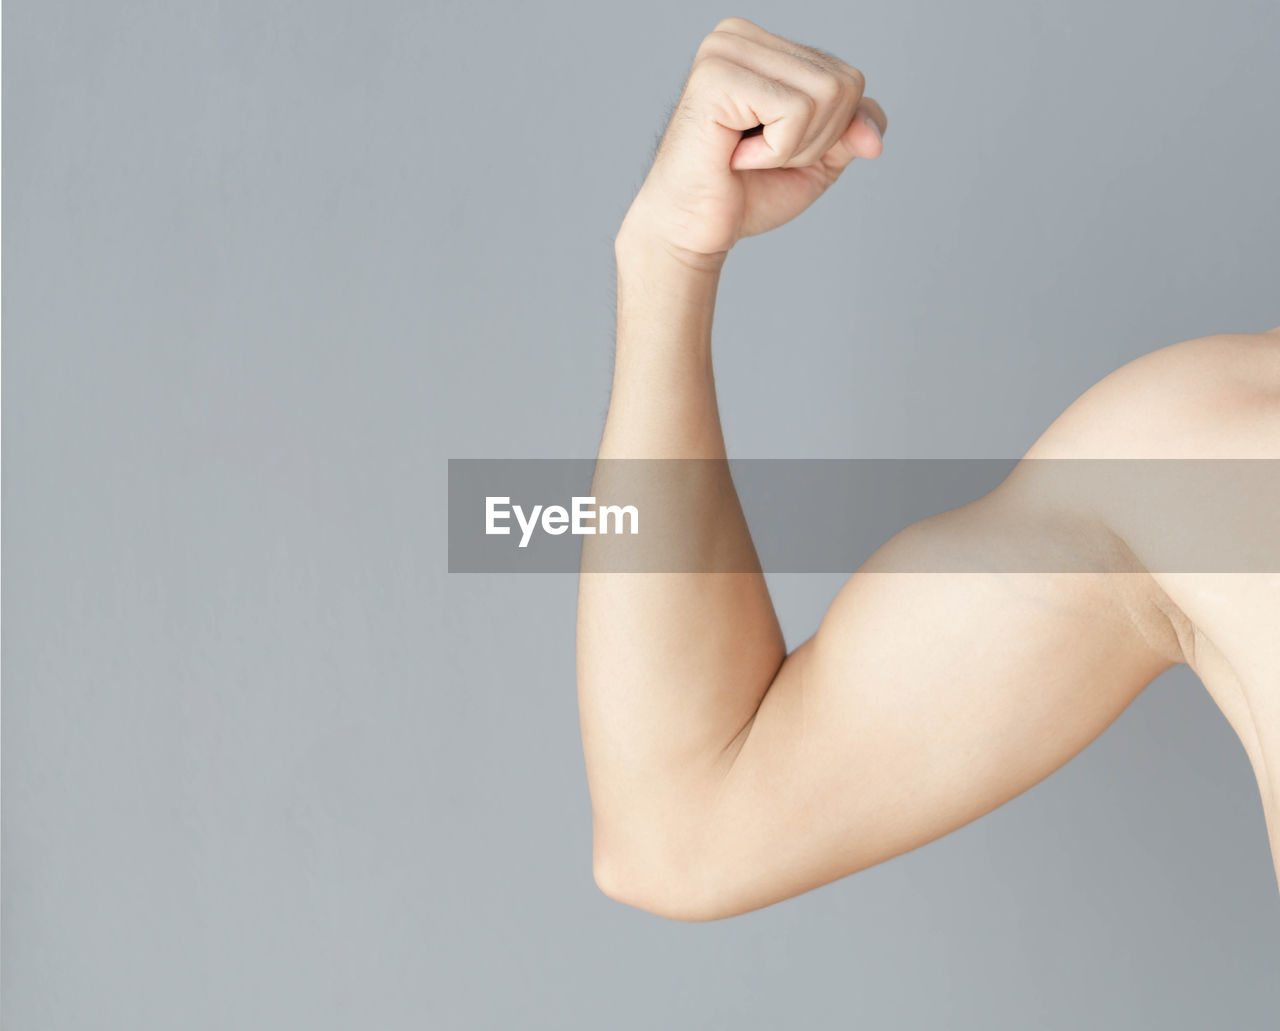 Cropped hand of man flexing muscles over gray background